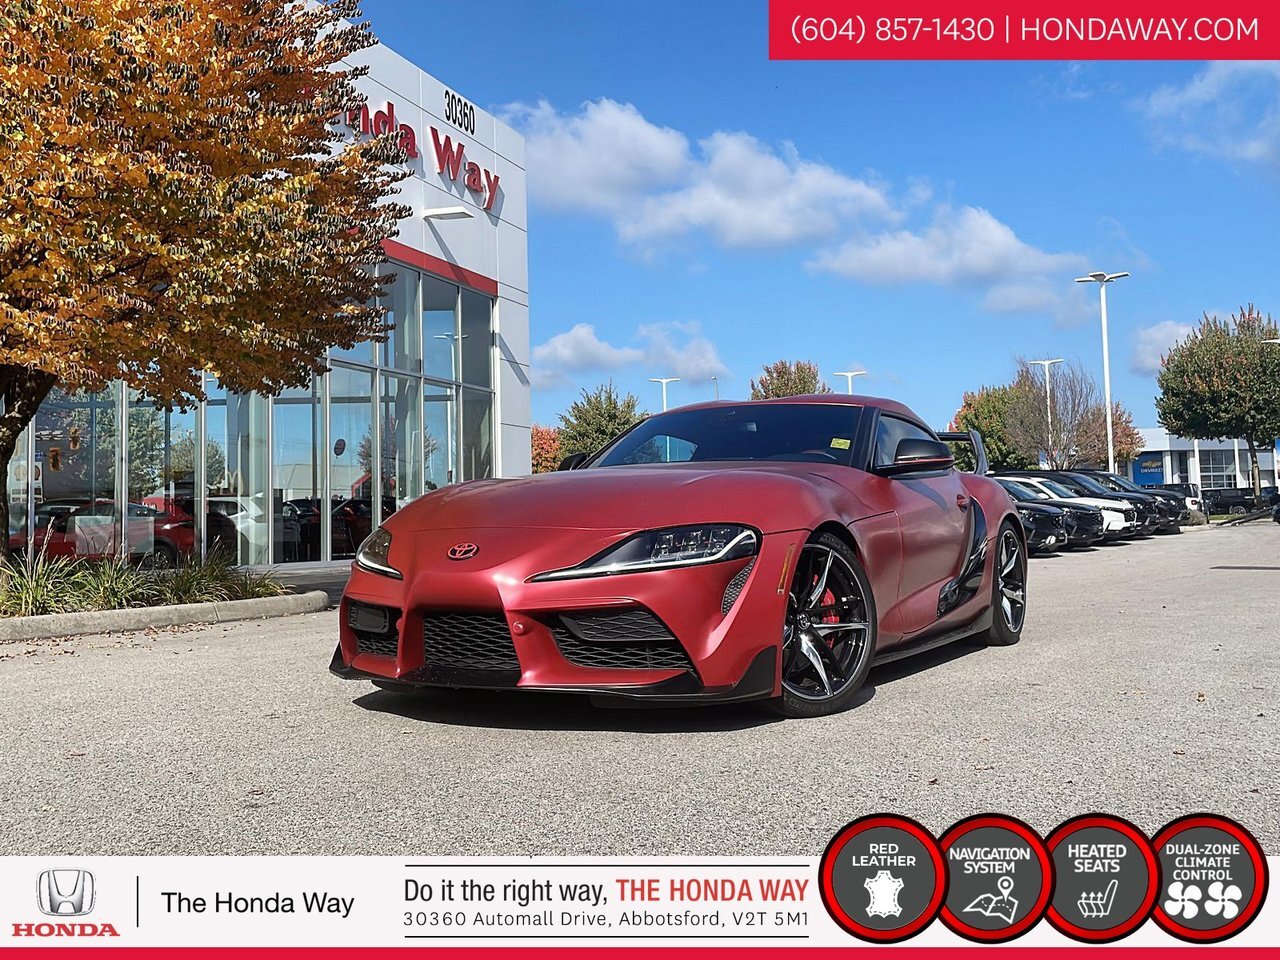 2021 Toyota GR Supra 3.0 8.8 INCH INFOTAINMENT SCREEN, RED LEATHER